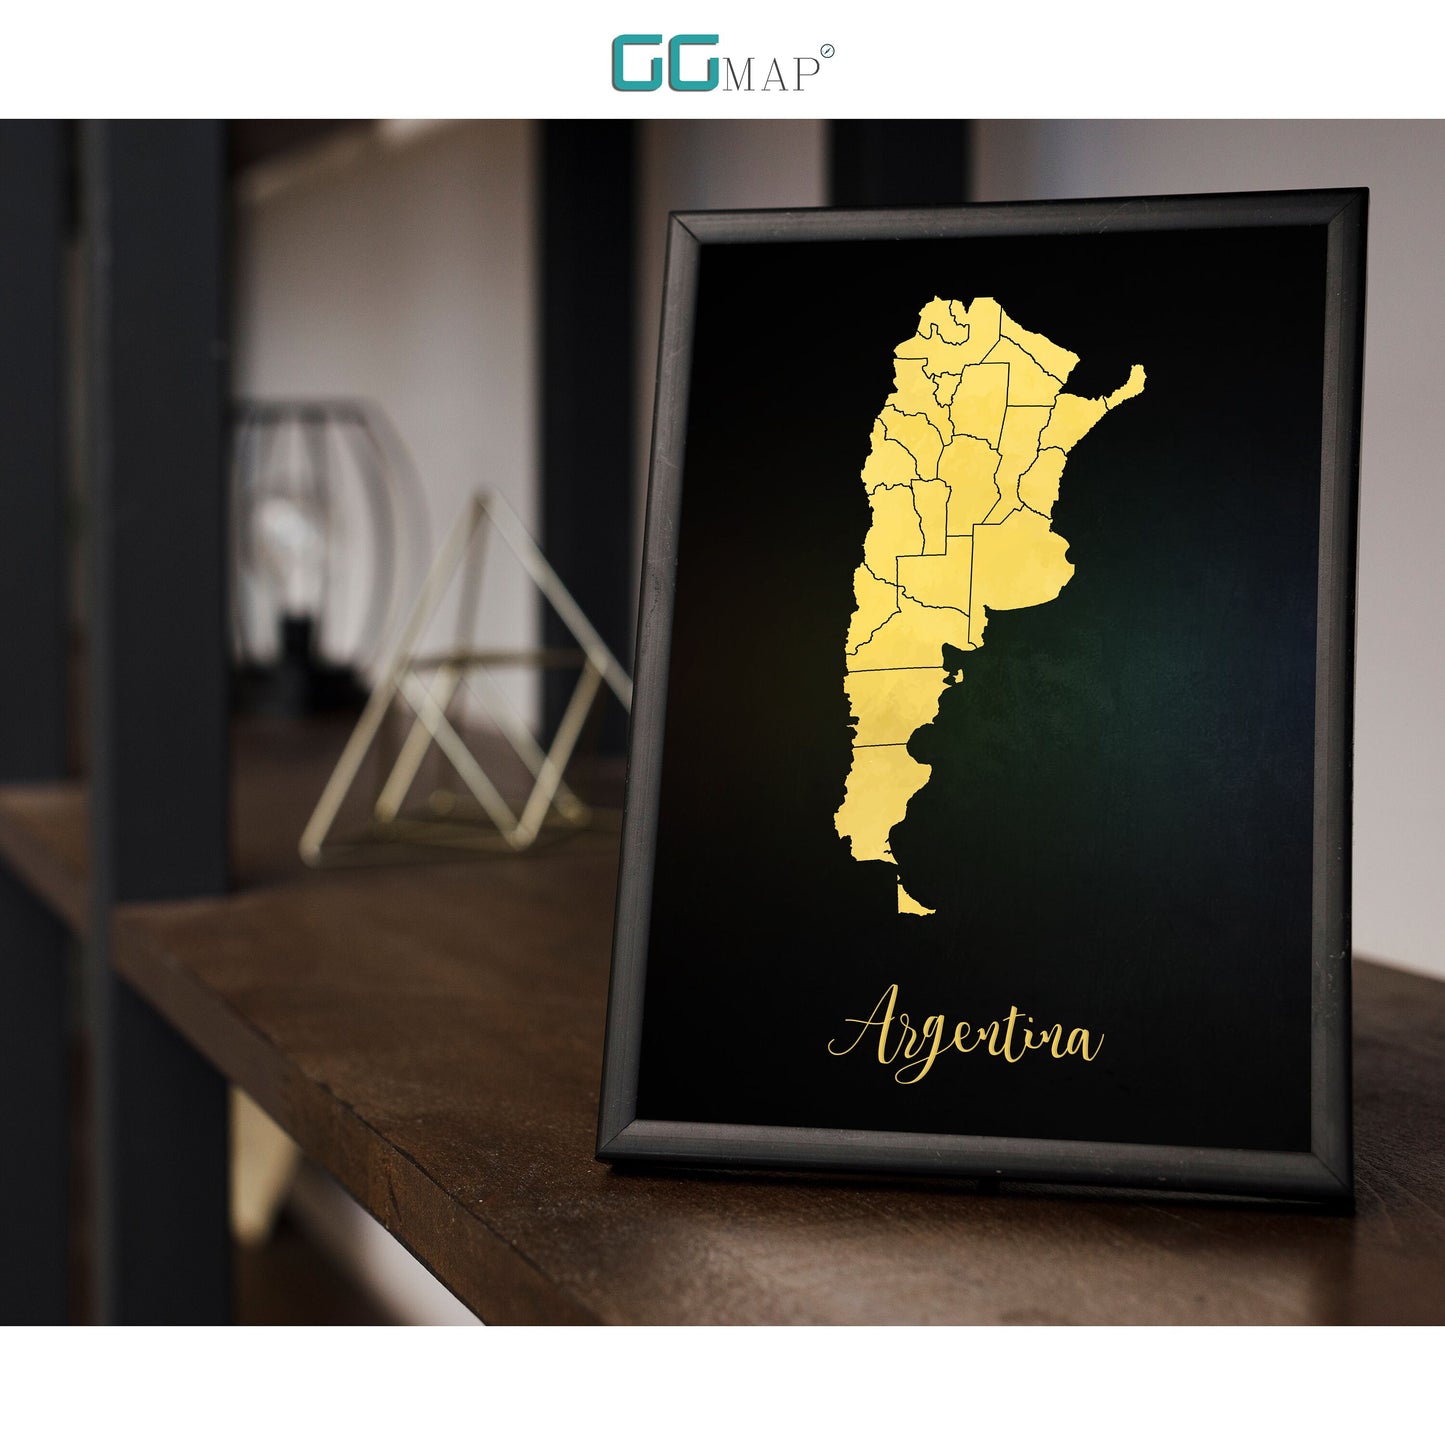 ARGENTINA map - Argentina gold map - Travel poster - Home Decor - Wall decor - Office map - Argentina gift - GGmap - Argentina poster